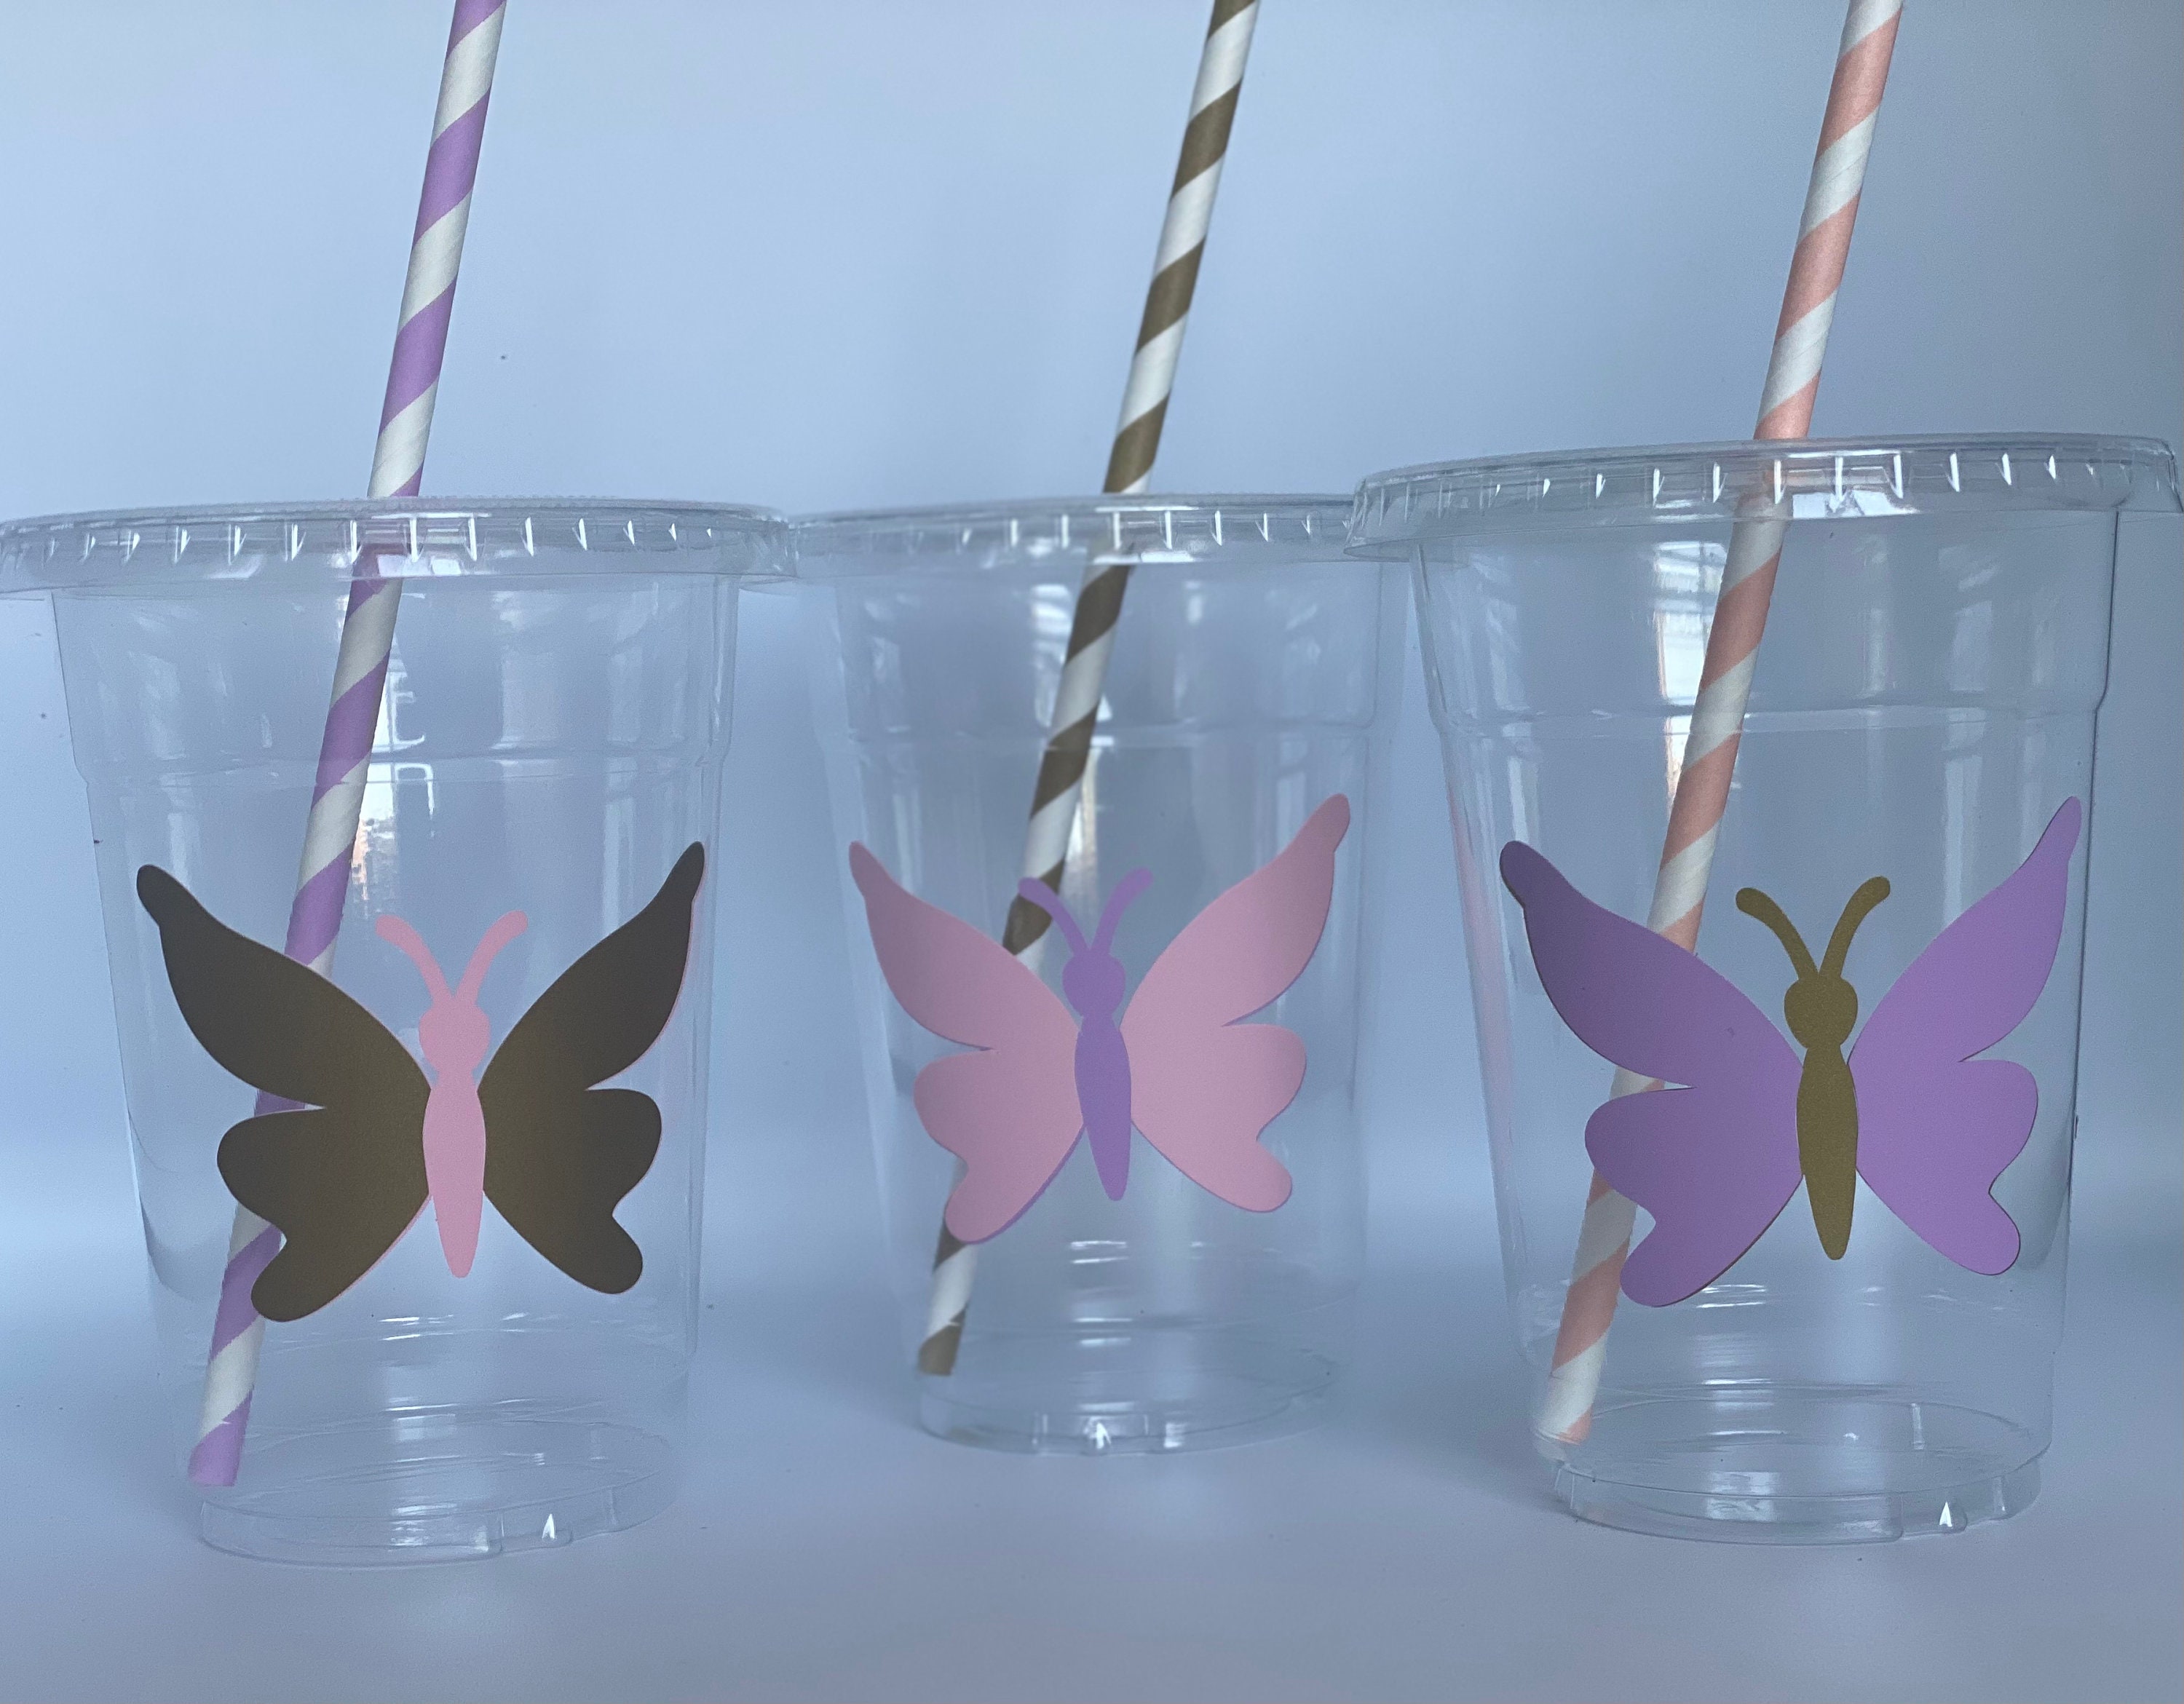 8pcs Colourful Butterfly Straws Eco Friendly Reusable Drinking Straws for  Baby Shower Birthday Wedding Party Decoration